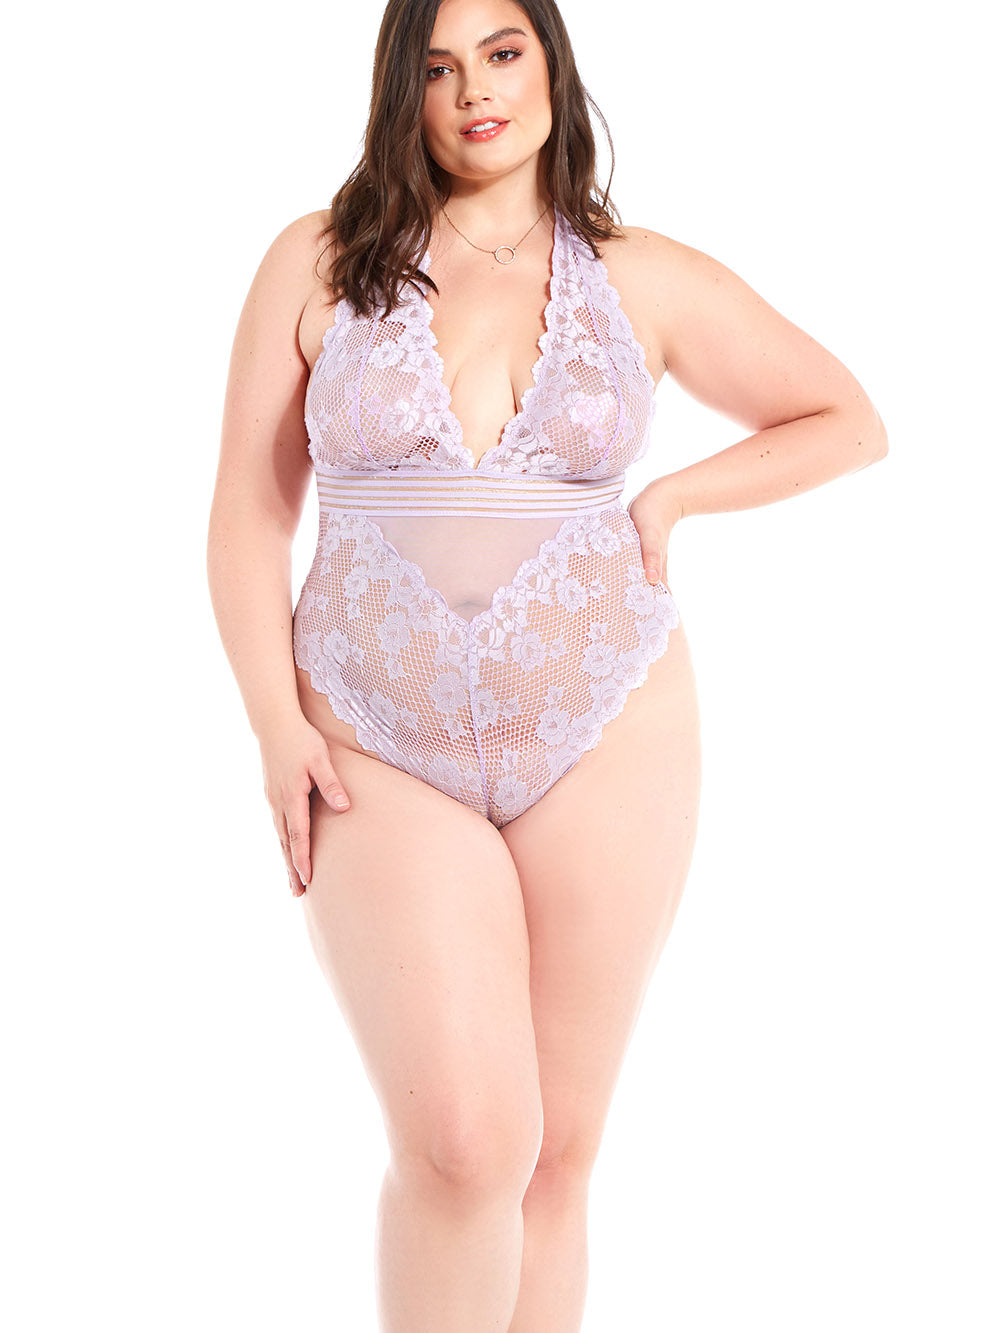 iCollection Plus Size Teddy Lingerie Lilac / 1X Florence Plus Size Teddy